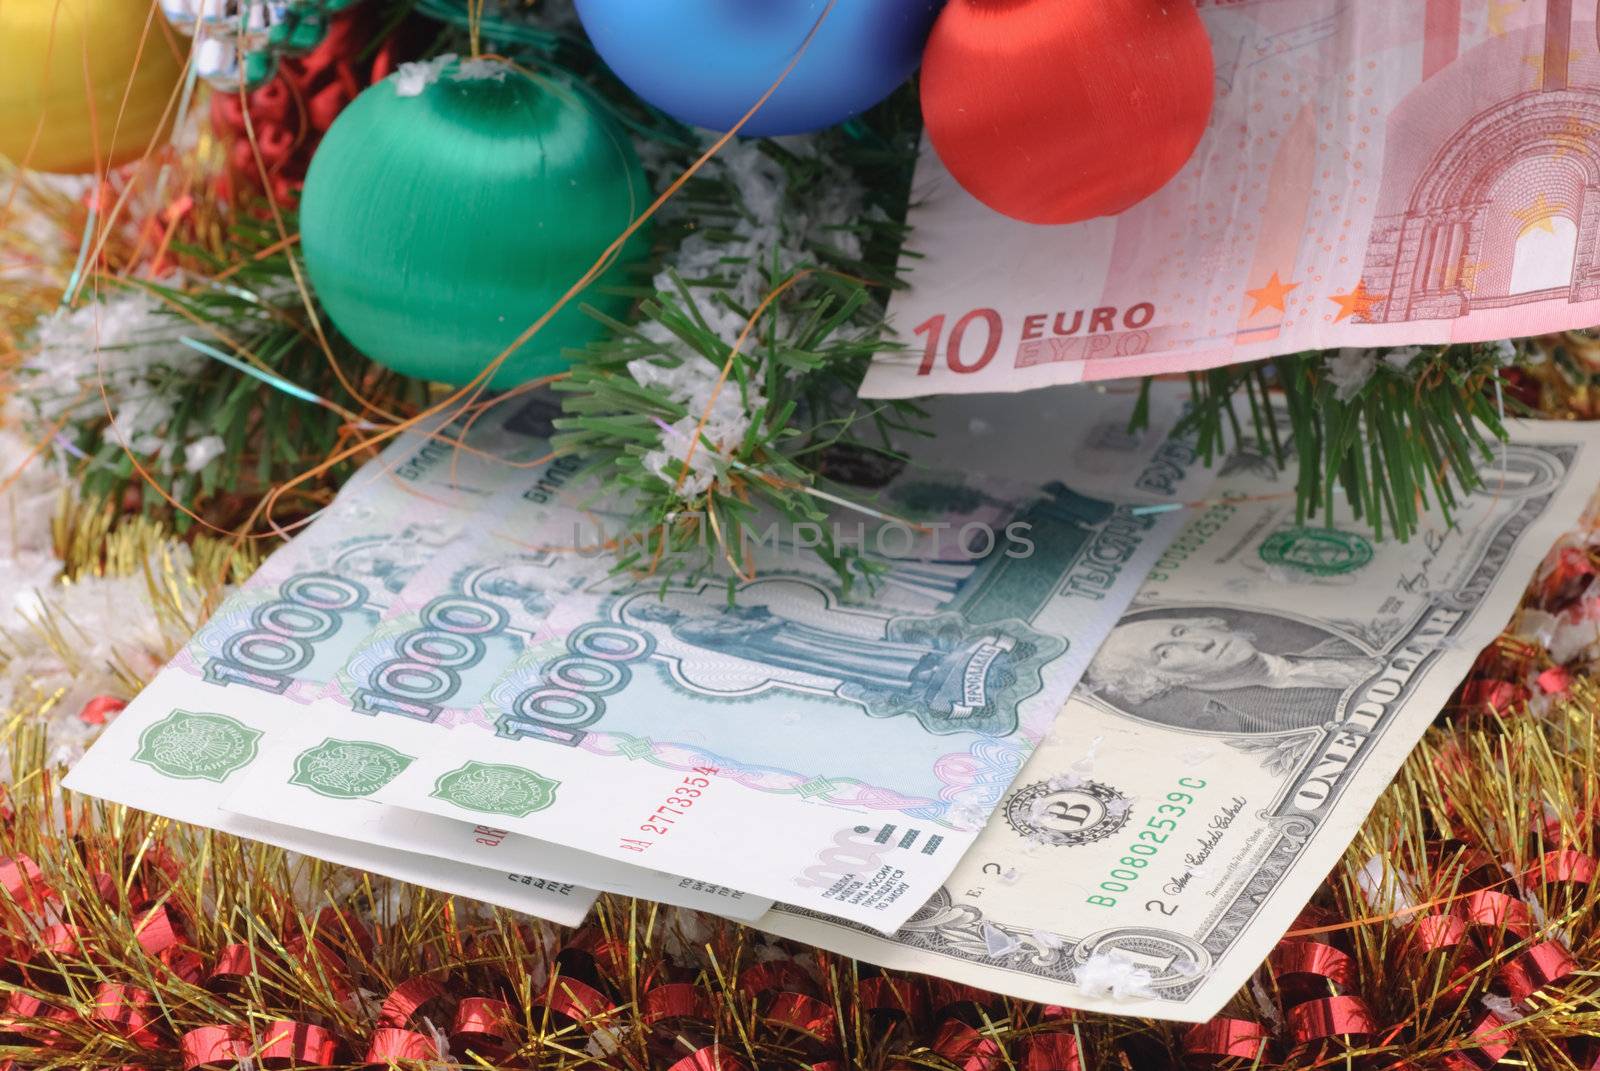 Banknotes are under the Christmas tree